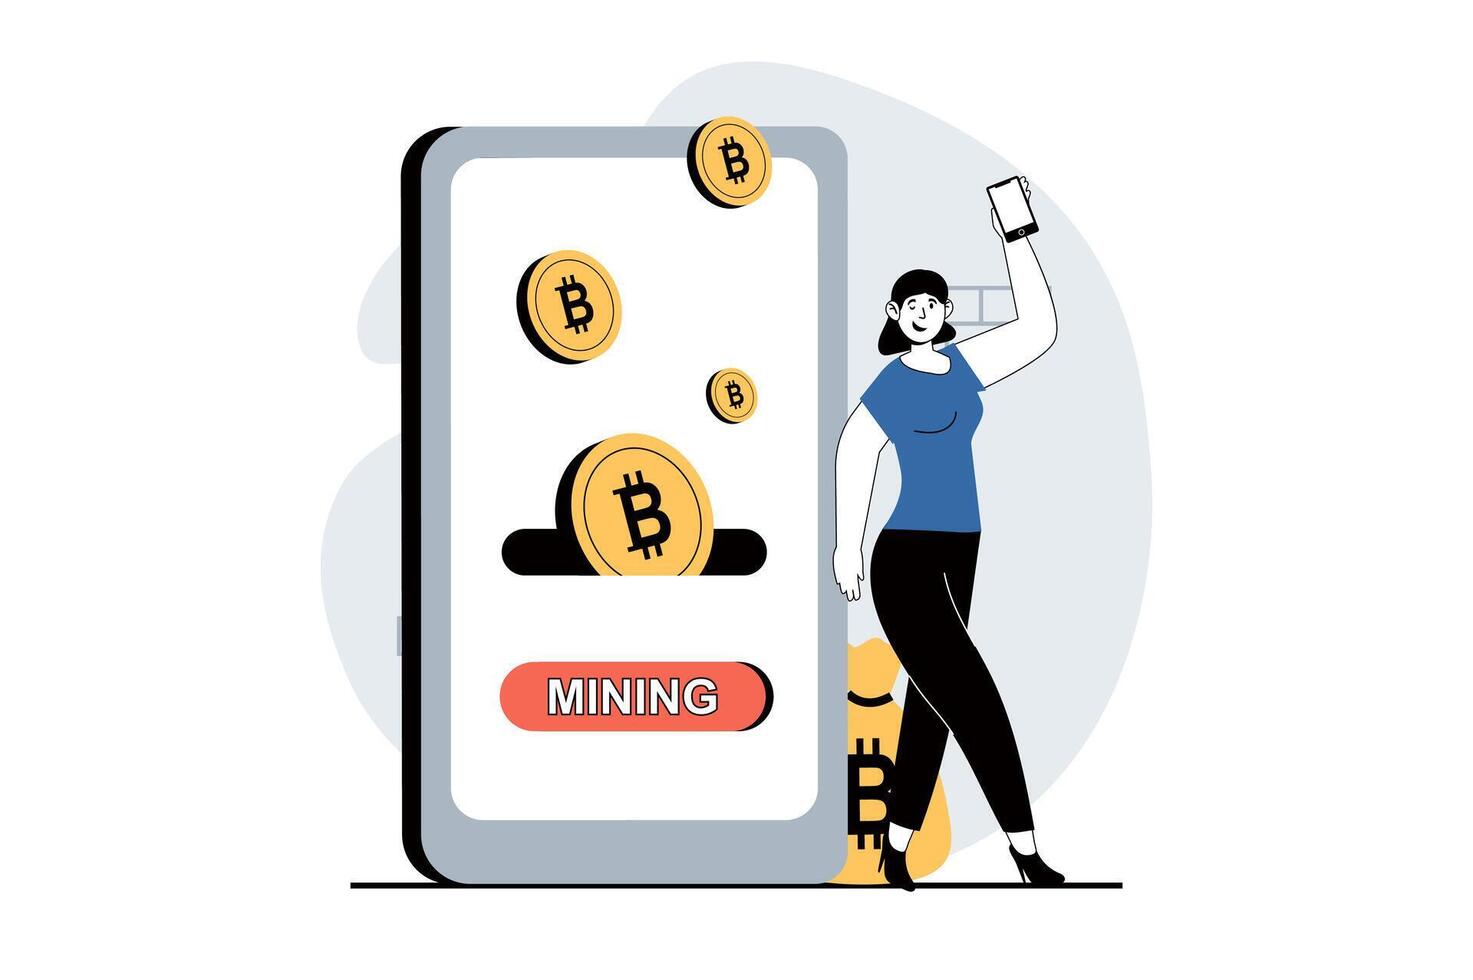 Cryptocurrency mining concept with people scene in flat design for web. Woman mining bitcoins and monitoring process at mobile app. Vector illustration for social media banner, marketing material.